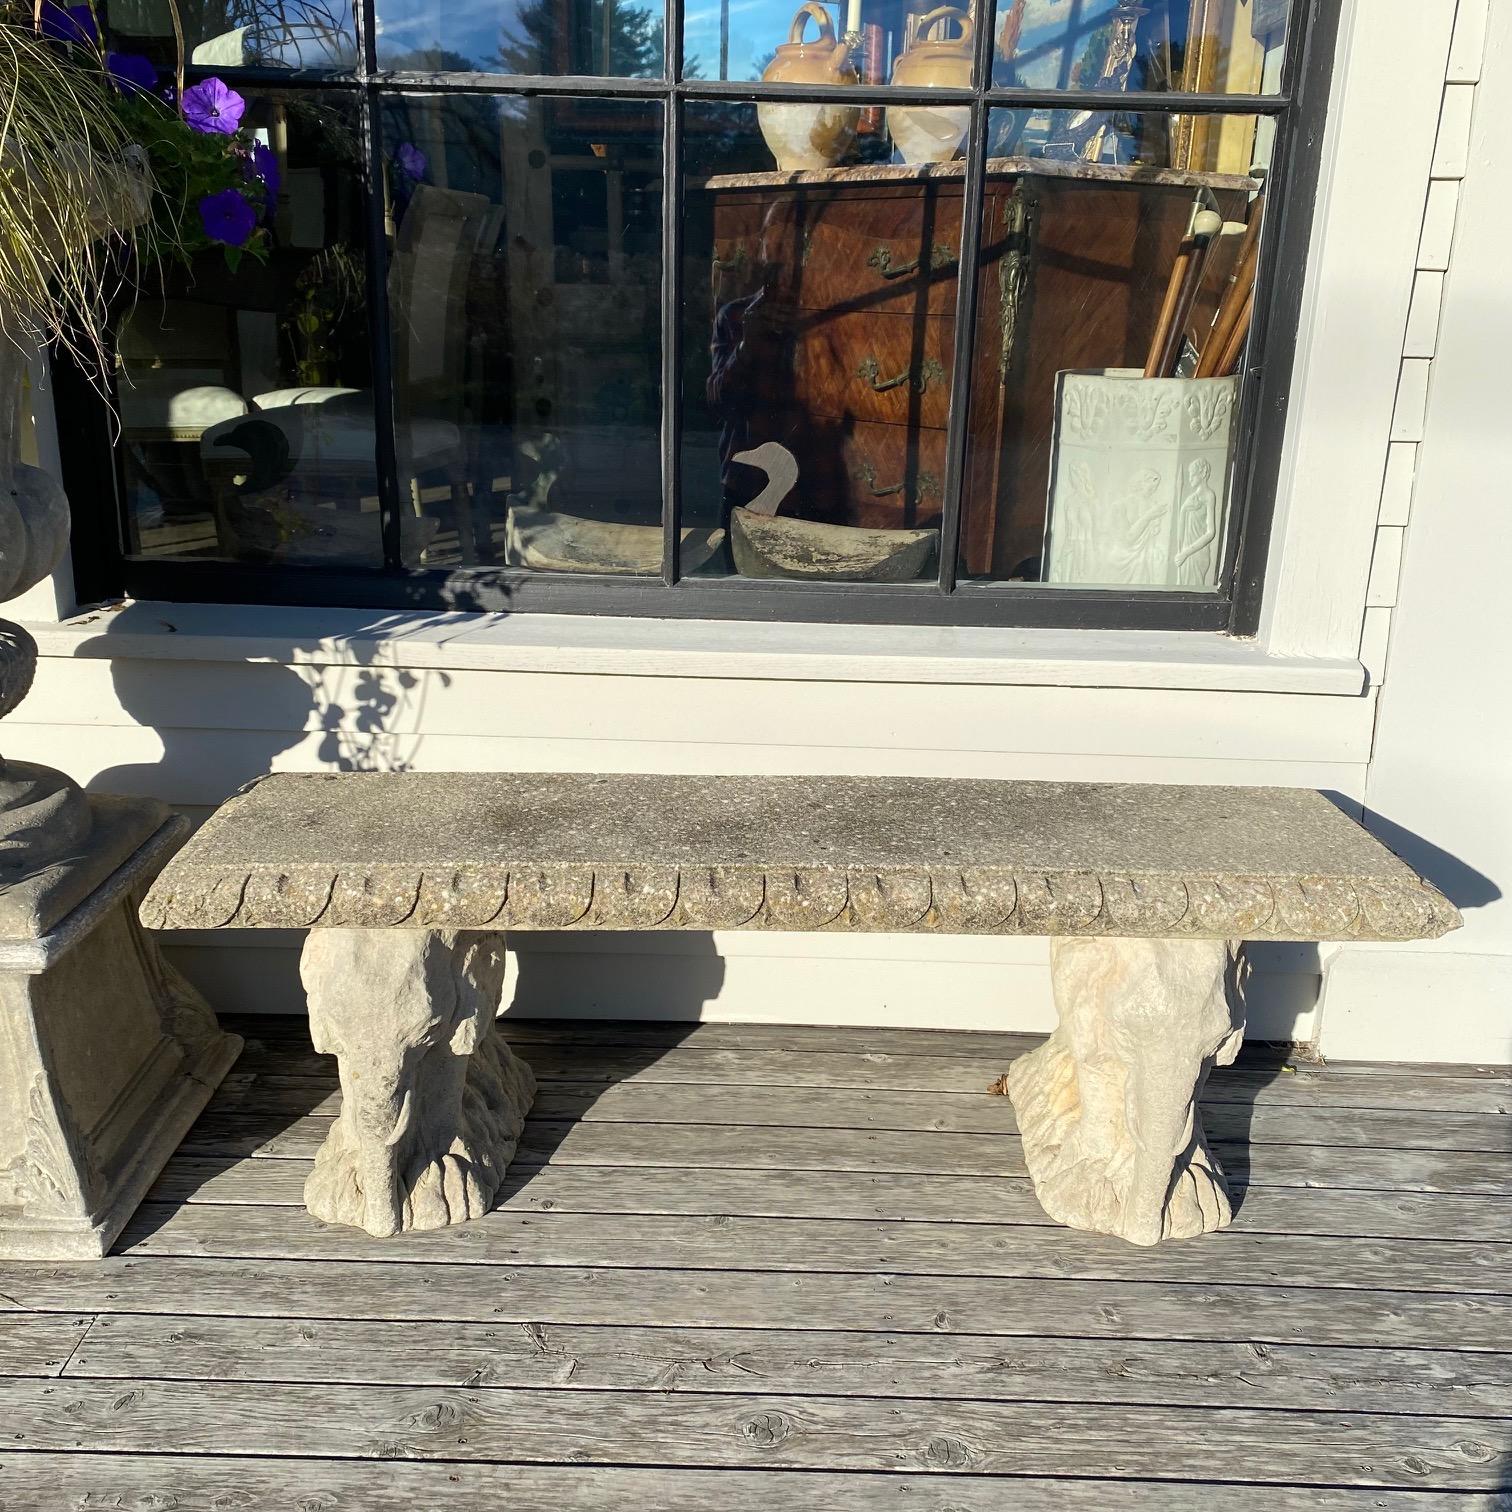 A cast stone seat with edge detail rests atop a pair of lovely cast stone supports in the shape of elephants. 
Note: A matching bench is available to make a pair, with lion base supports.

